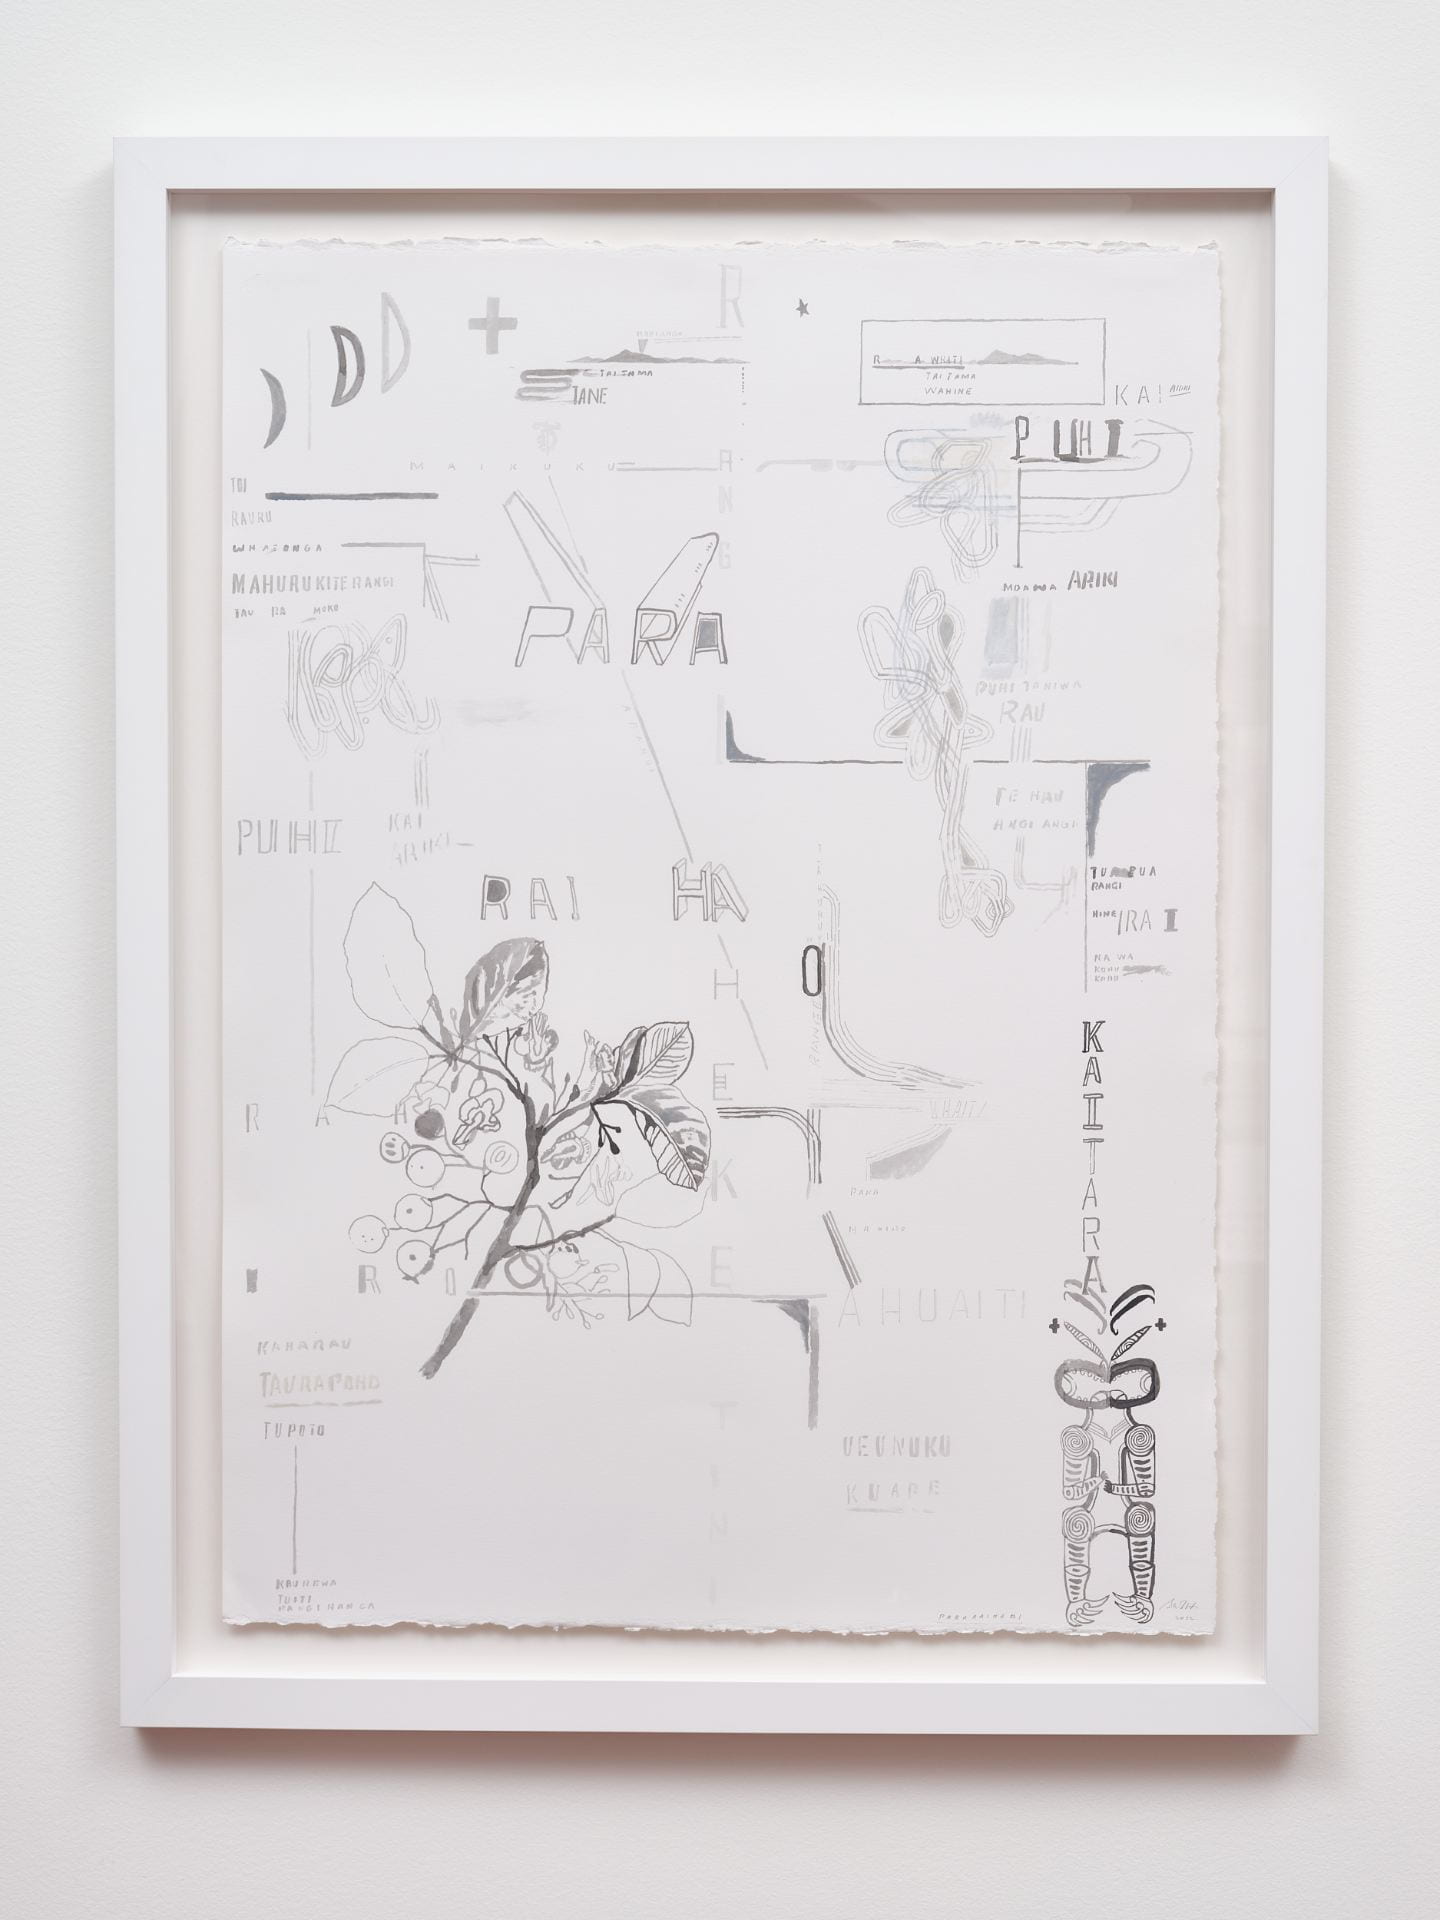 A framed rectangle drawing consisting of drawn text, leaves and motifs